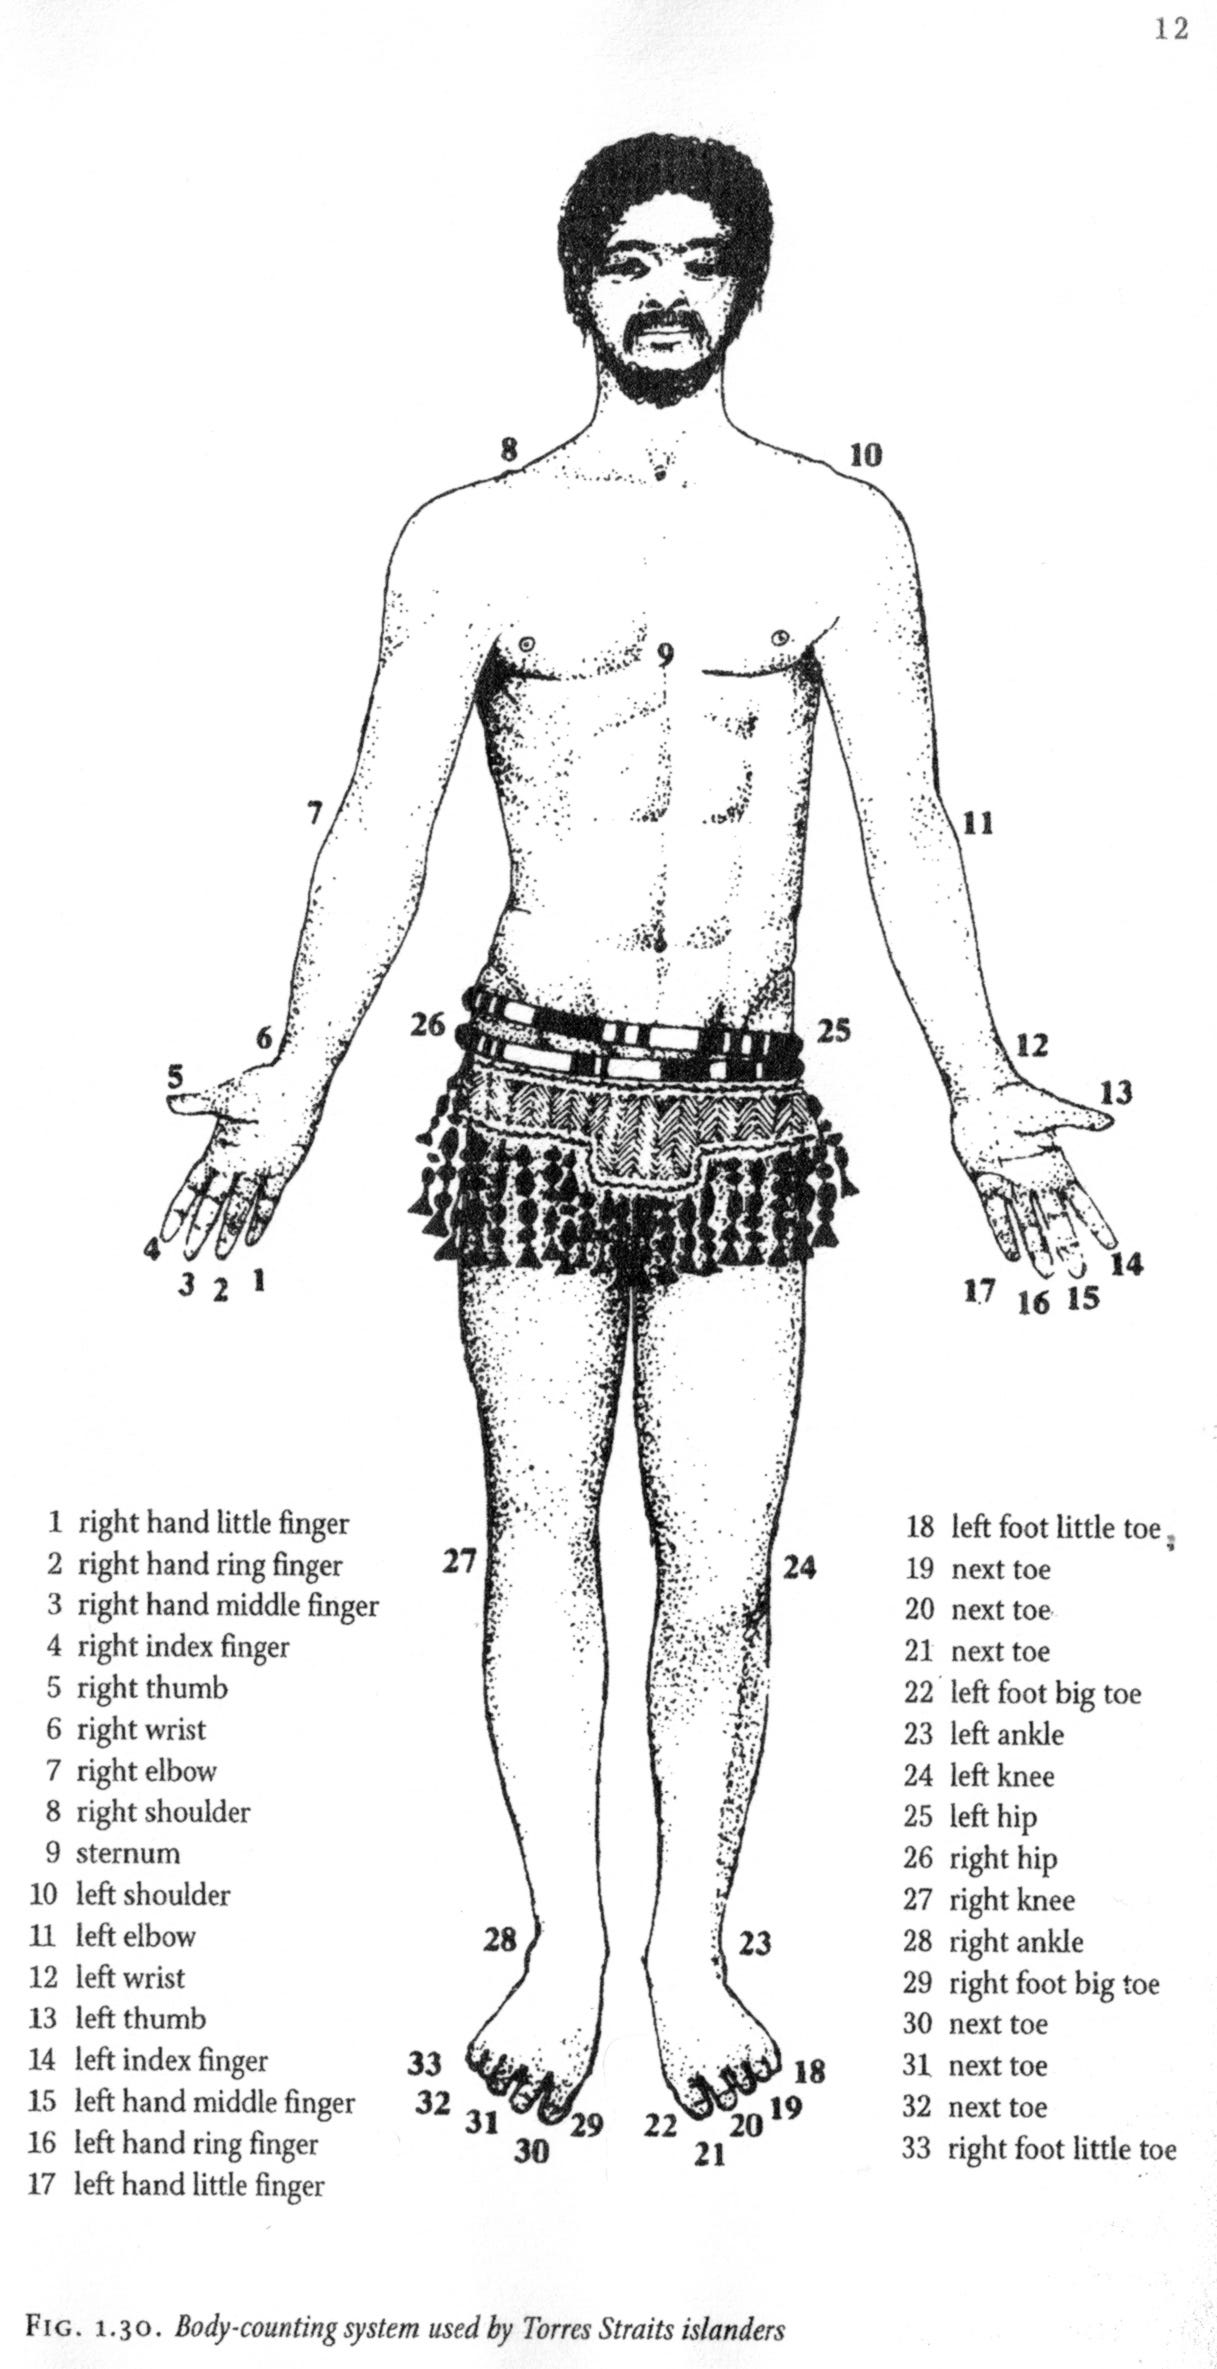 Sketch of man showing points on body corresponding to numbers 1 to 33, where "right wrist" corresponds to 6, and "left wrist" corresponds to 12, while "left foot little toe" corresponds to 18